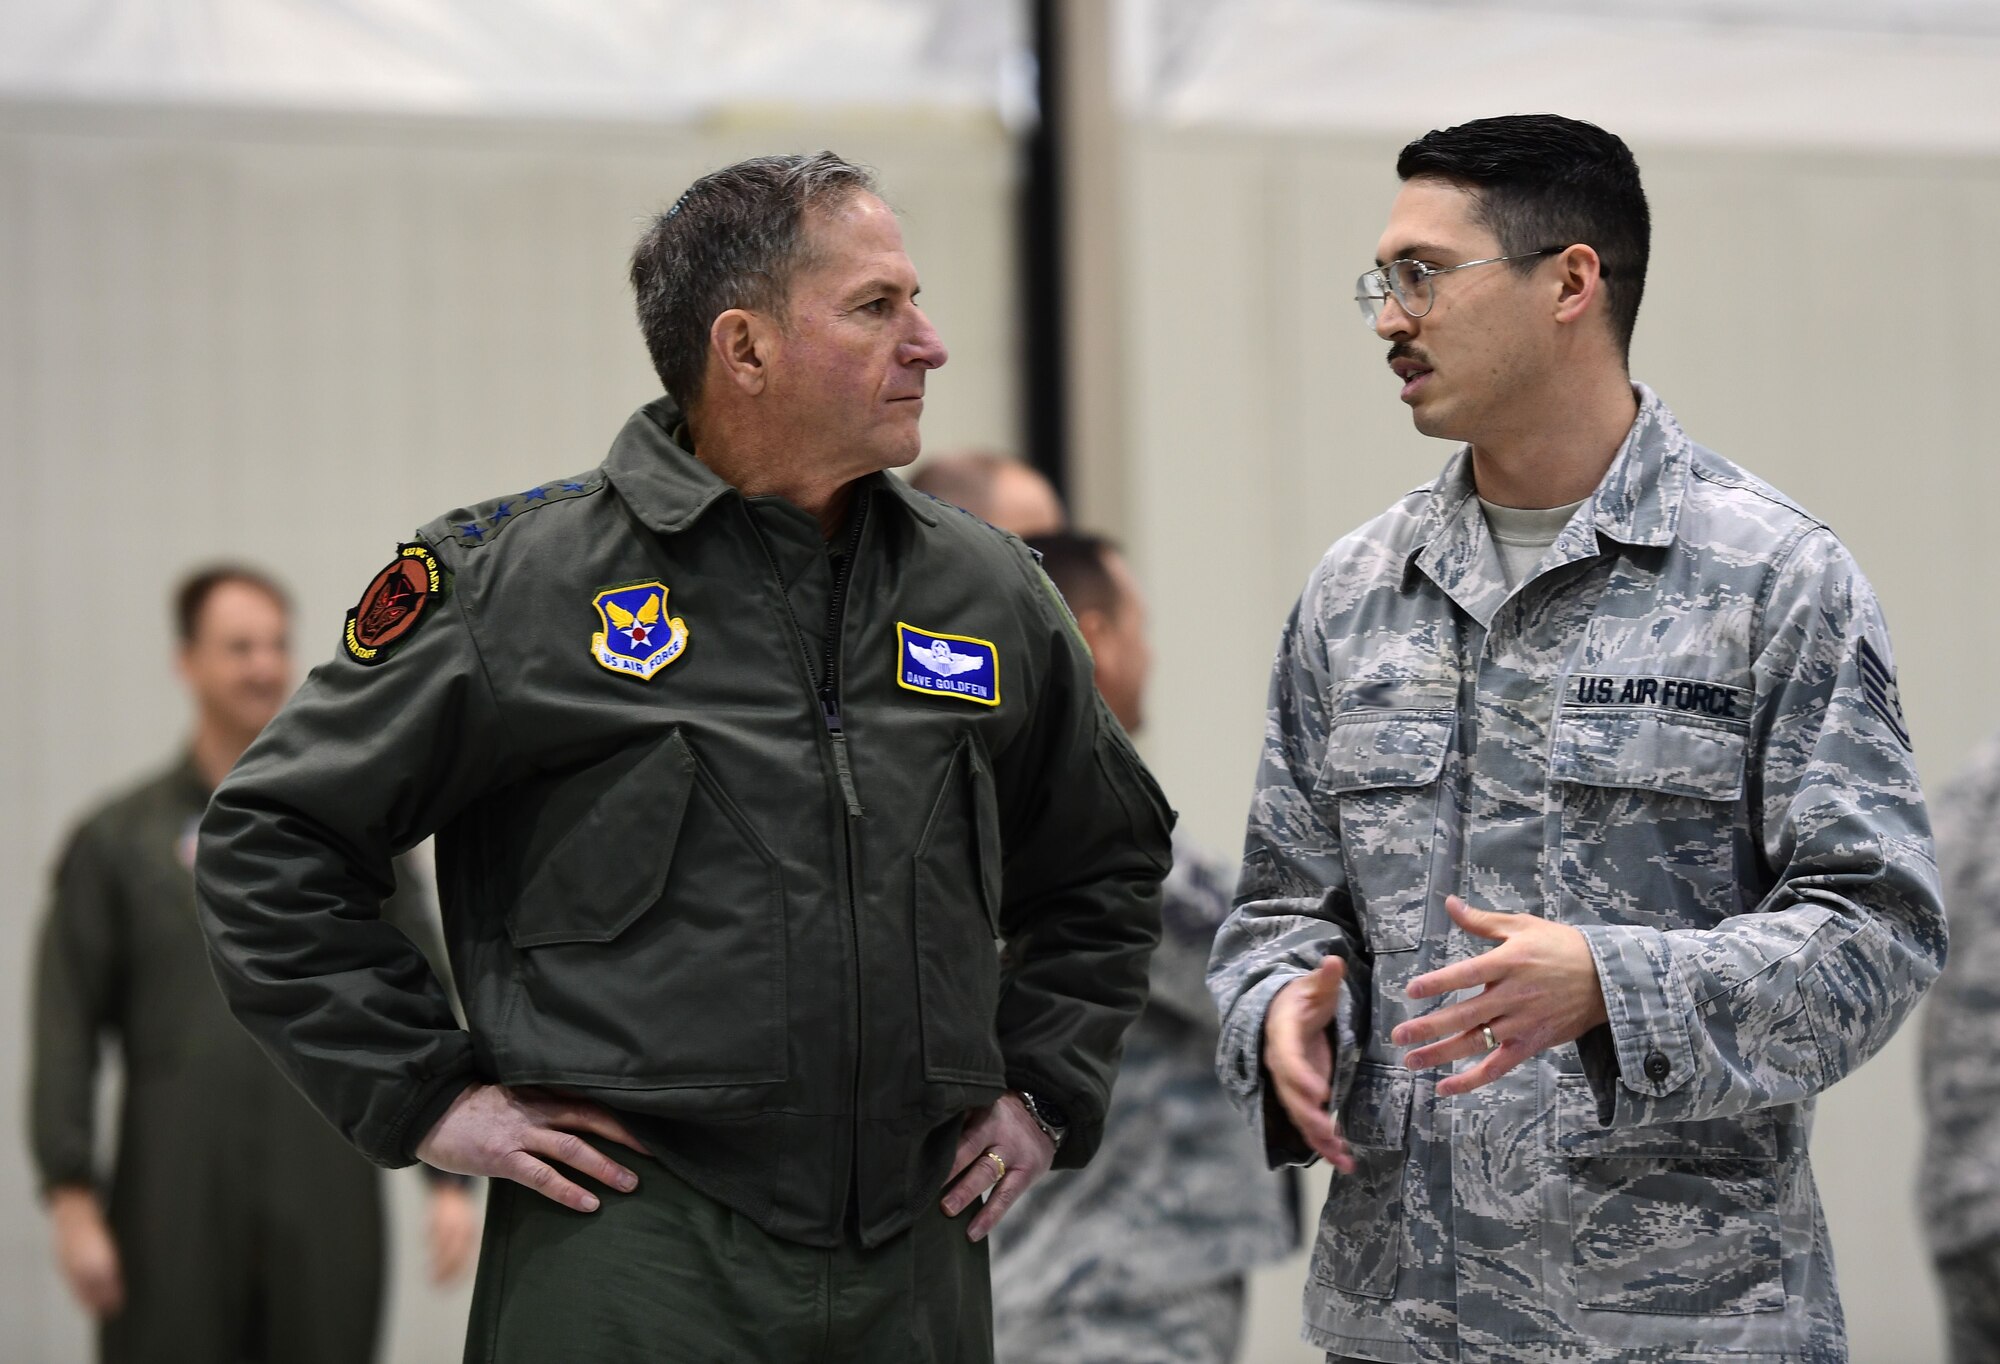 Air Force Chief of Staff Gen. David L. Goldfein discusses MQ-9 Reaper avionics from Staff Sgt. Michael, 432nd Aircraft Maintenance Squadron avionics technician, Jan. 9, 2017, at Creech Air Force Base, Nev. Goldfein toured operational squadrons around the base to meet with 432nd Wing/432nd Air Expeditionary Wing and 799th Air Base Group Airmen.  (U.S. Air Force photo/Senior Airman Christian Clausen)